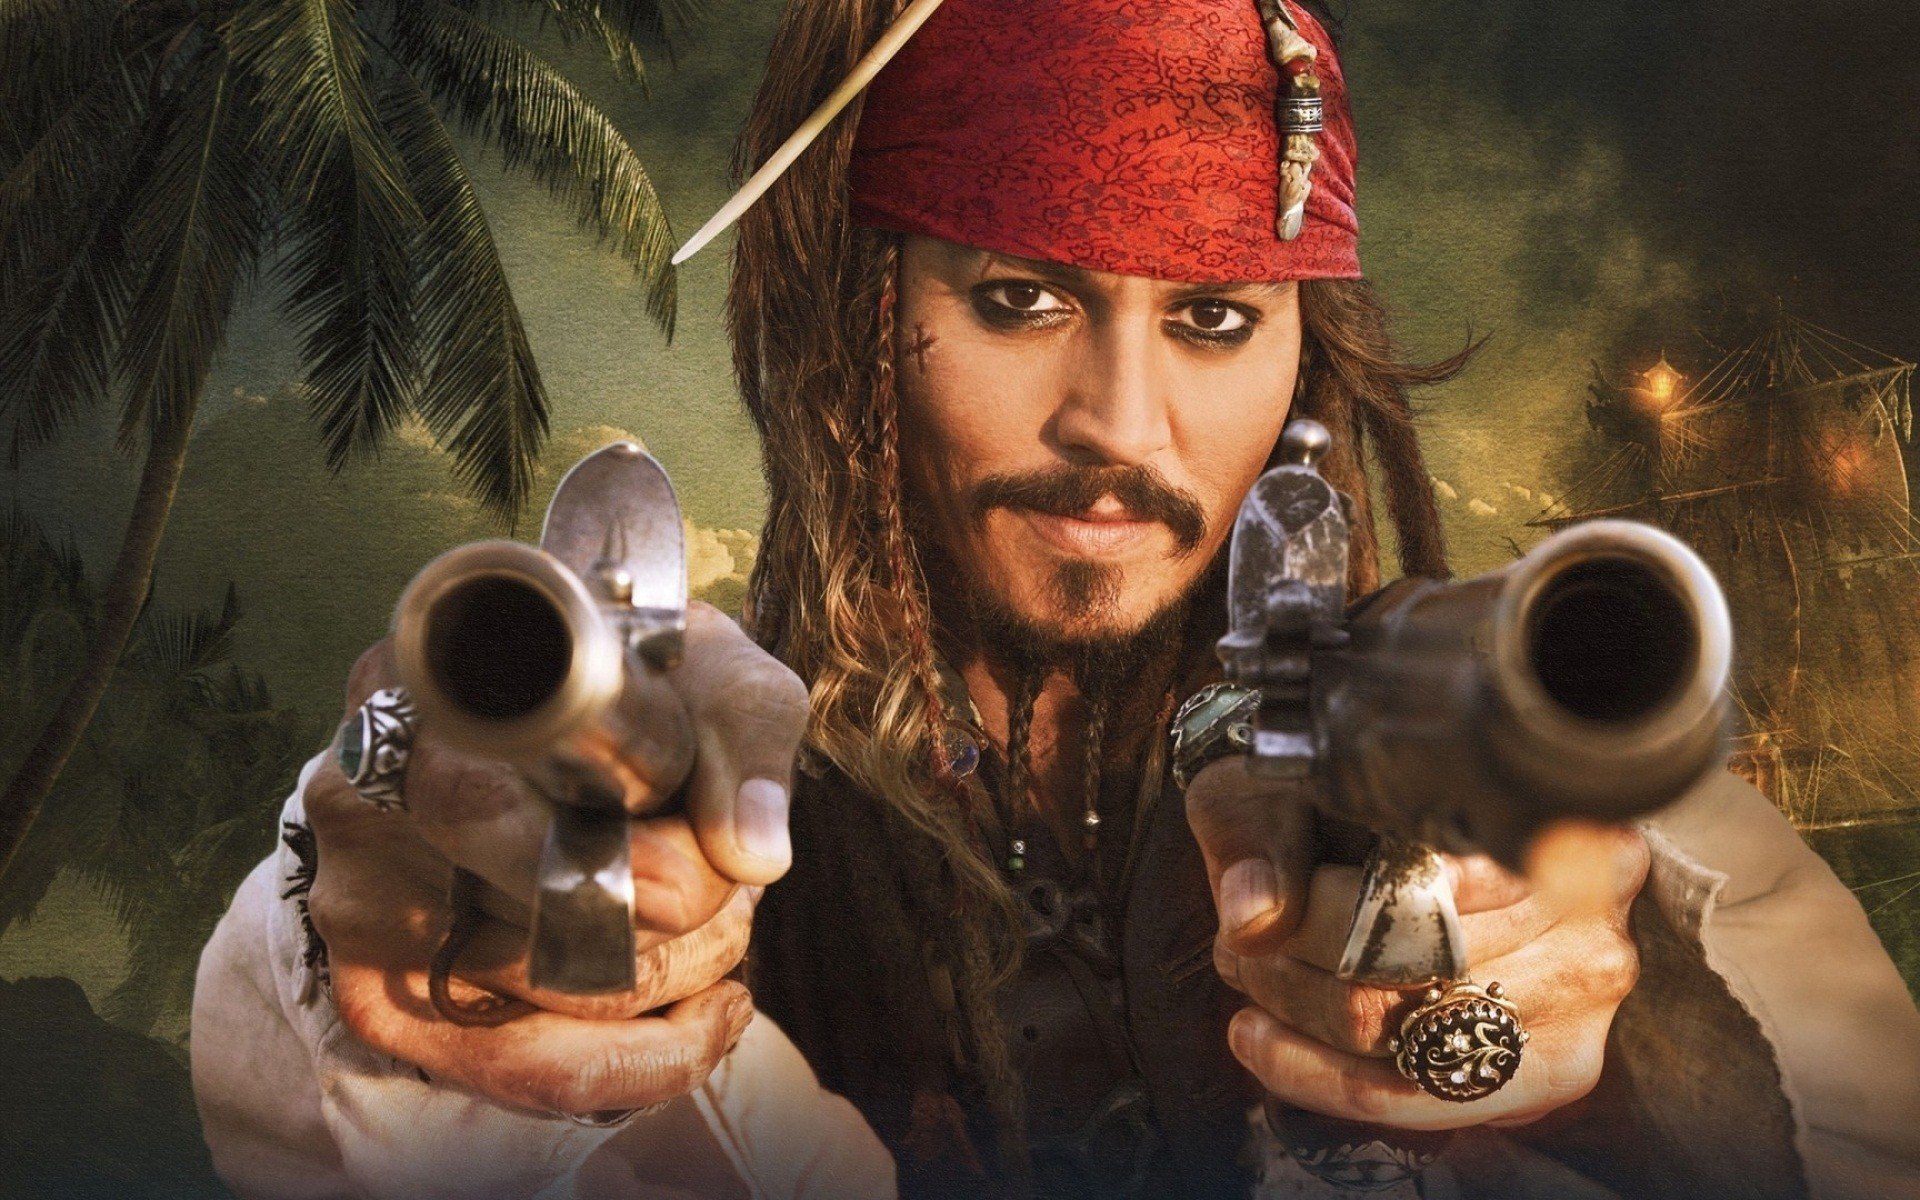 Free Download Captain Jack Sparrow With Gun Hd Wallpapers 1920x1200 For Your Desktop Mobile Tablet Explore 77 Captain Jack Sparrow Wallpaper Caribbean Hd Wallpapers Pirates Hd Wallpaper